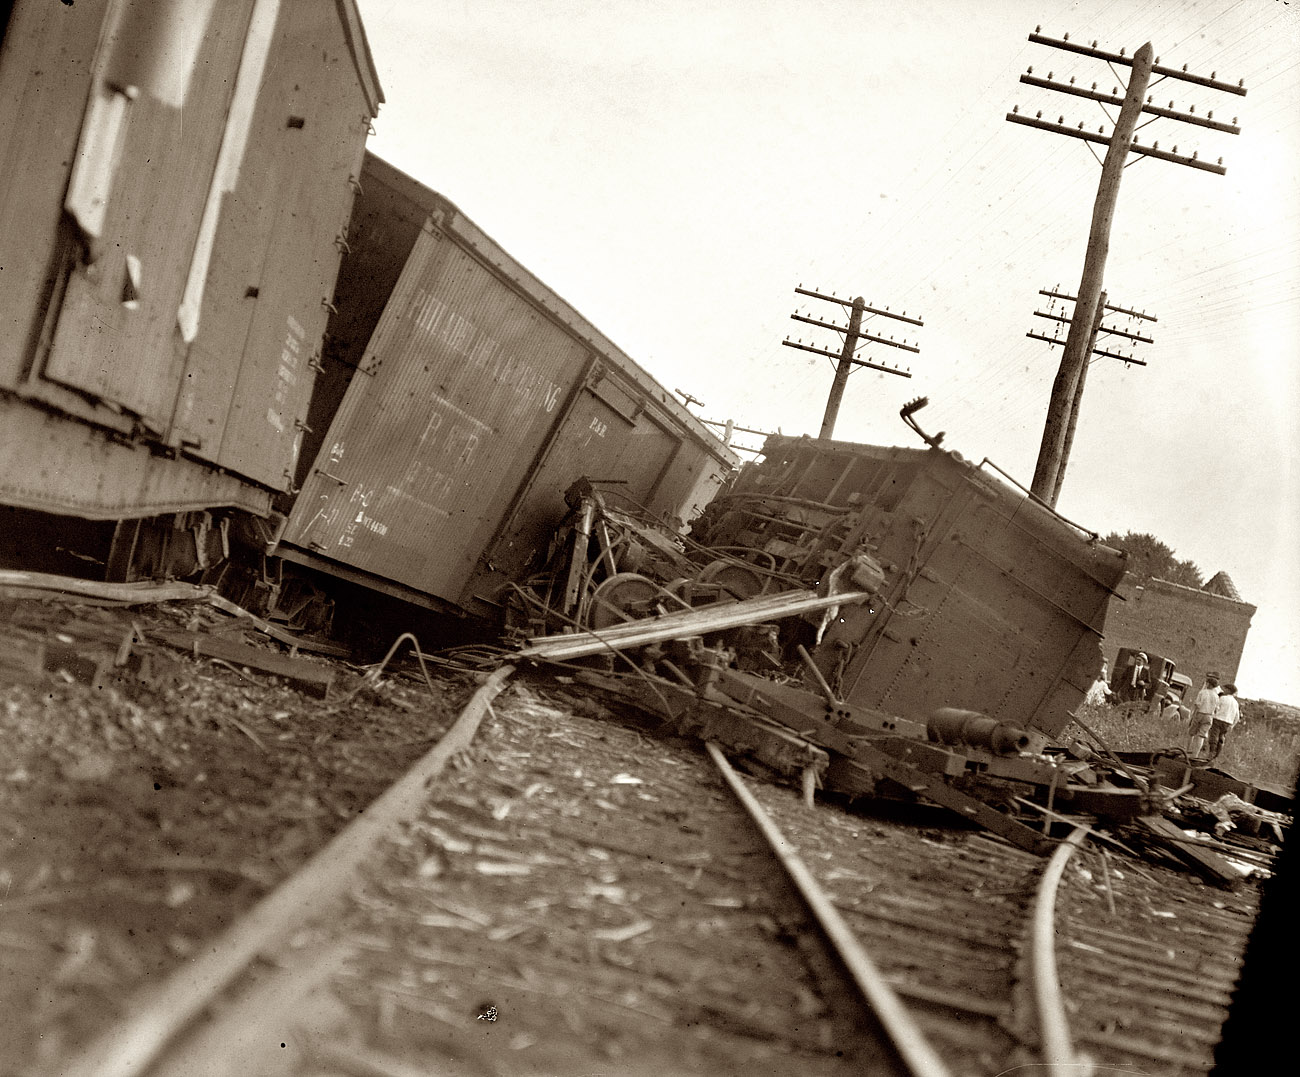 Washington area, 1922. "Railroad wreck." View full size. National Photo Company Collection. The tilted camera gives a nice arrangement of diagonals.